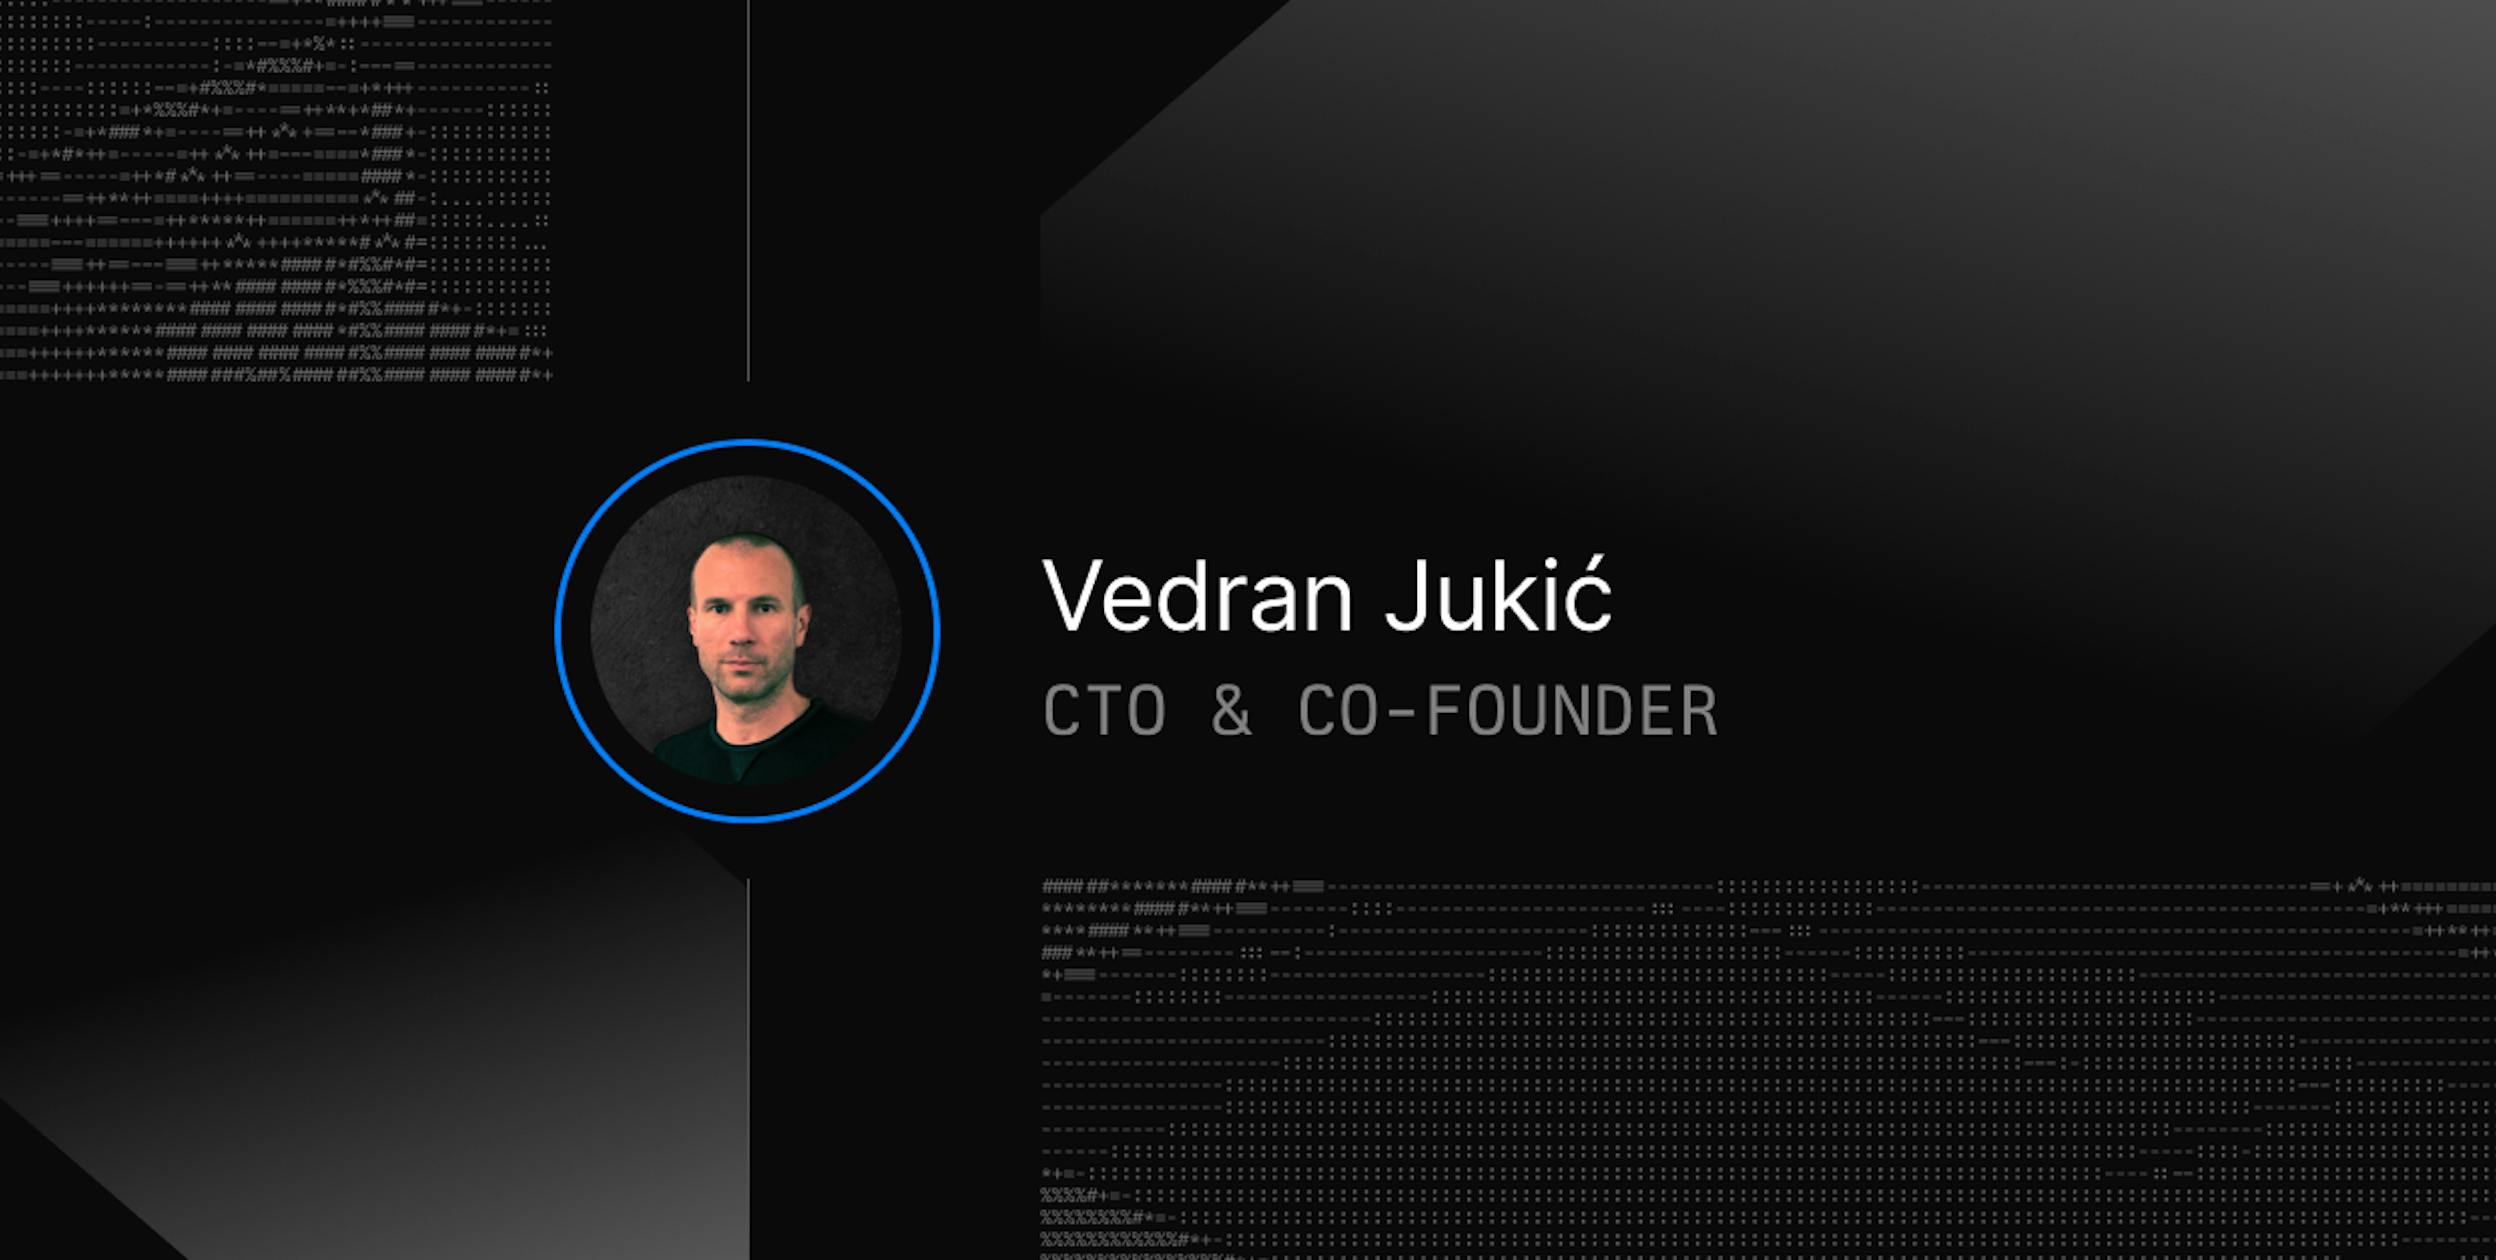 Meet Vedran Jukic, Our Co-founder and CTO